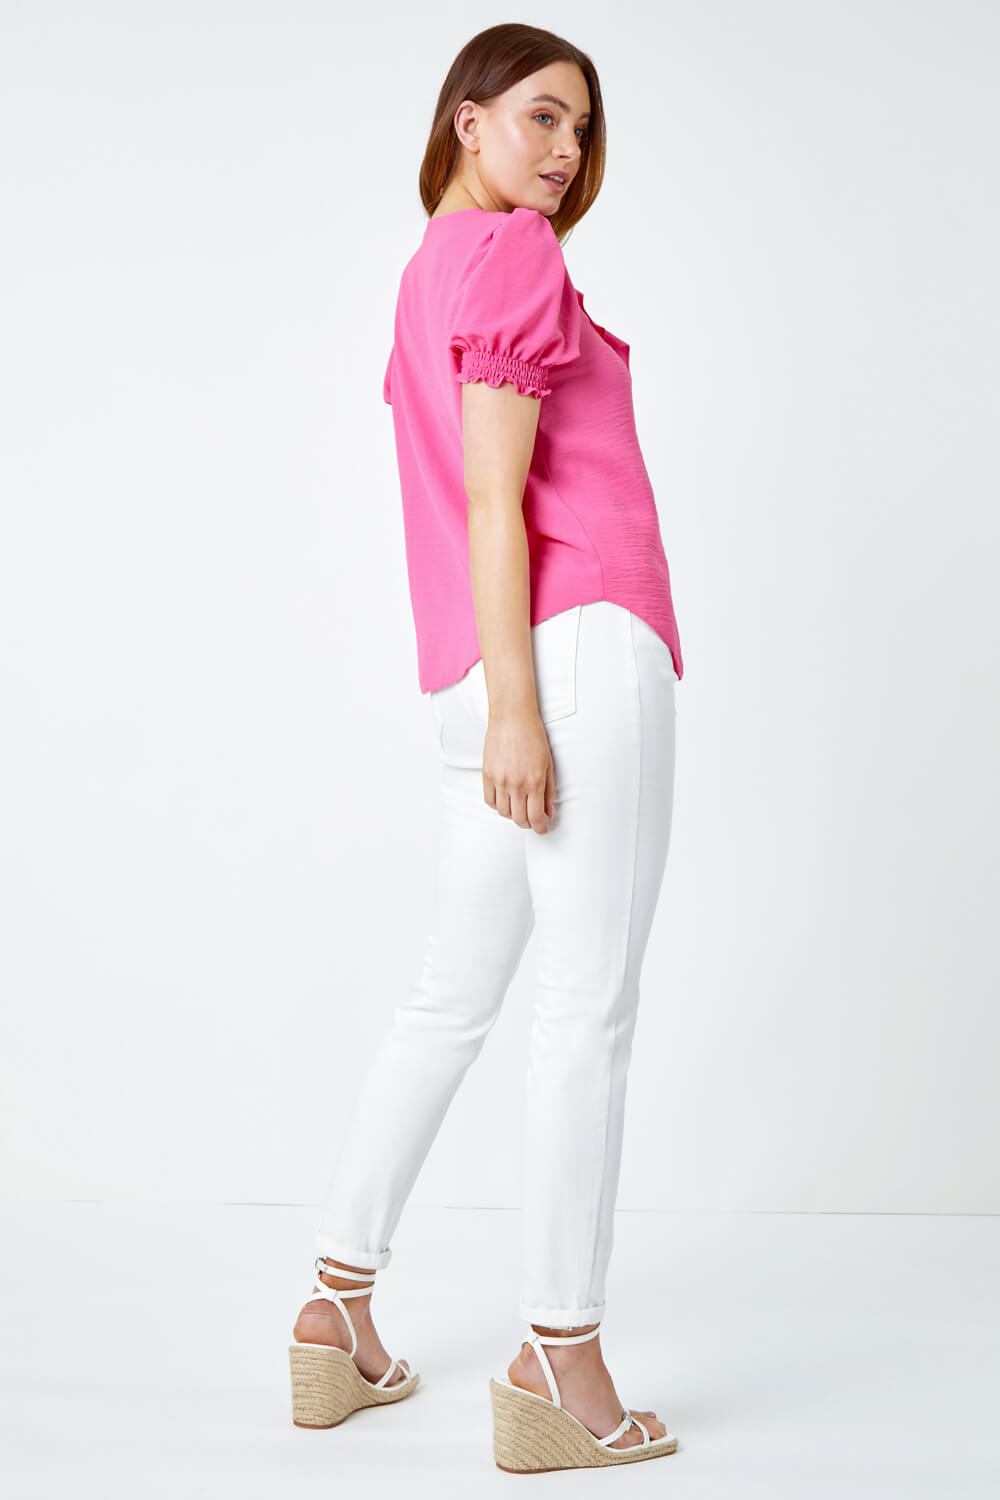 PINK Ruffle Front Tie Detail Blouse, Image 3 of 5